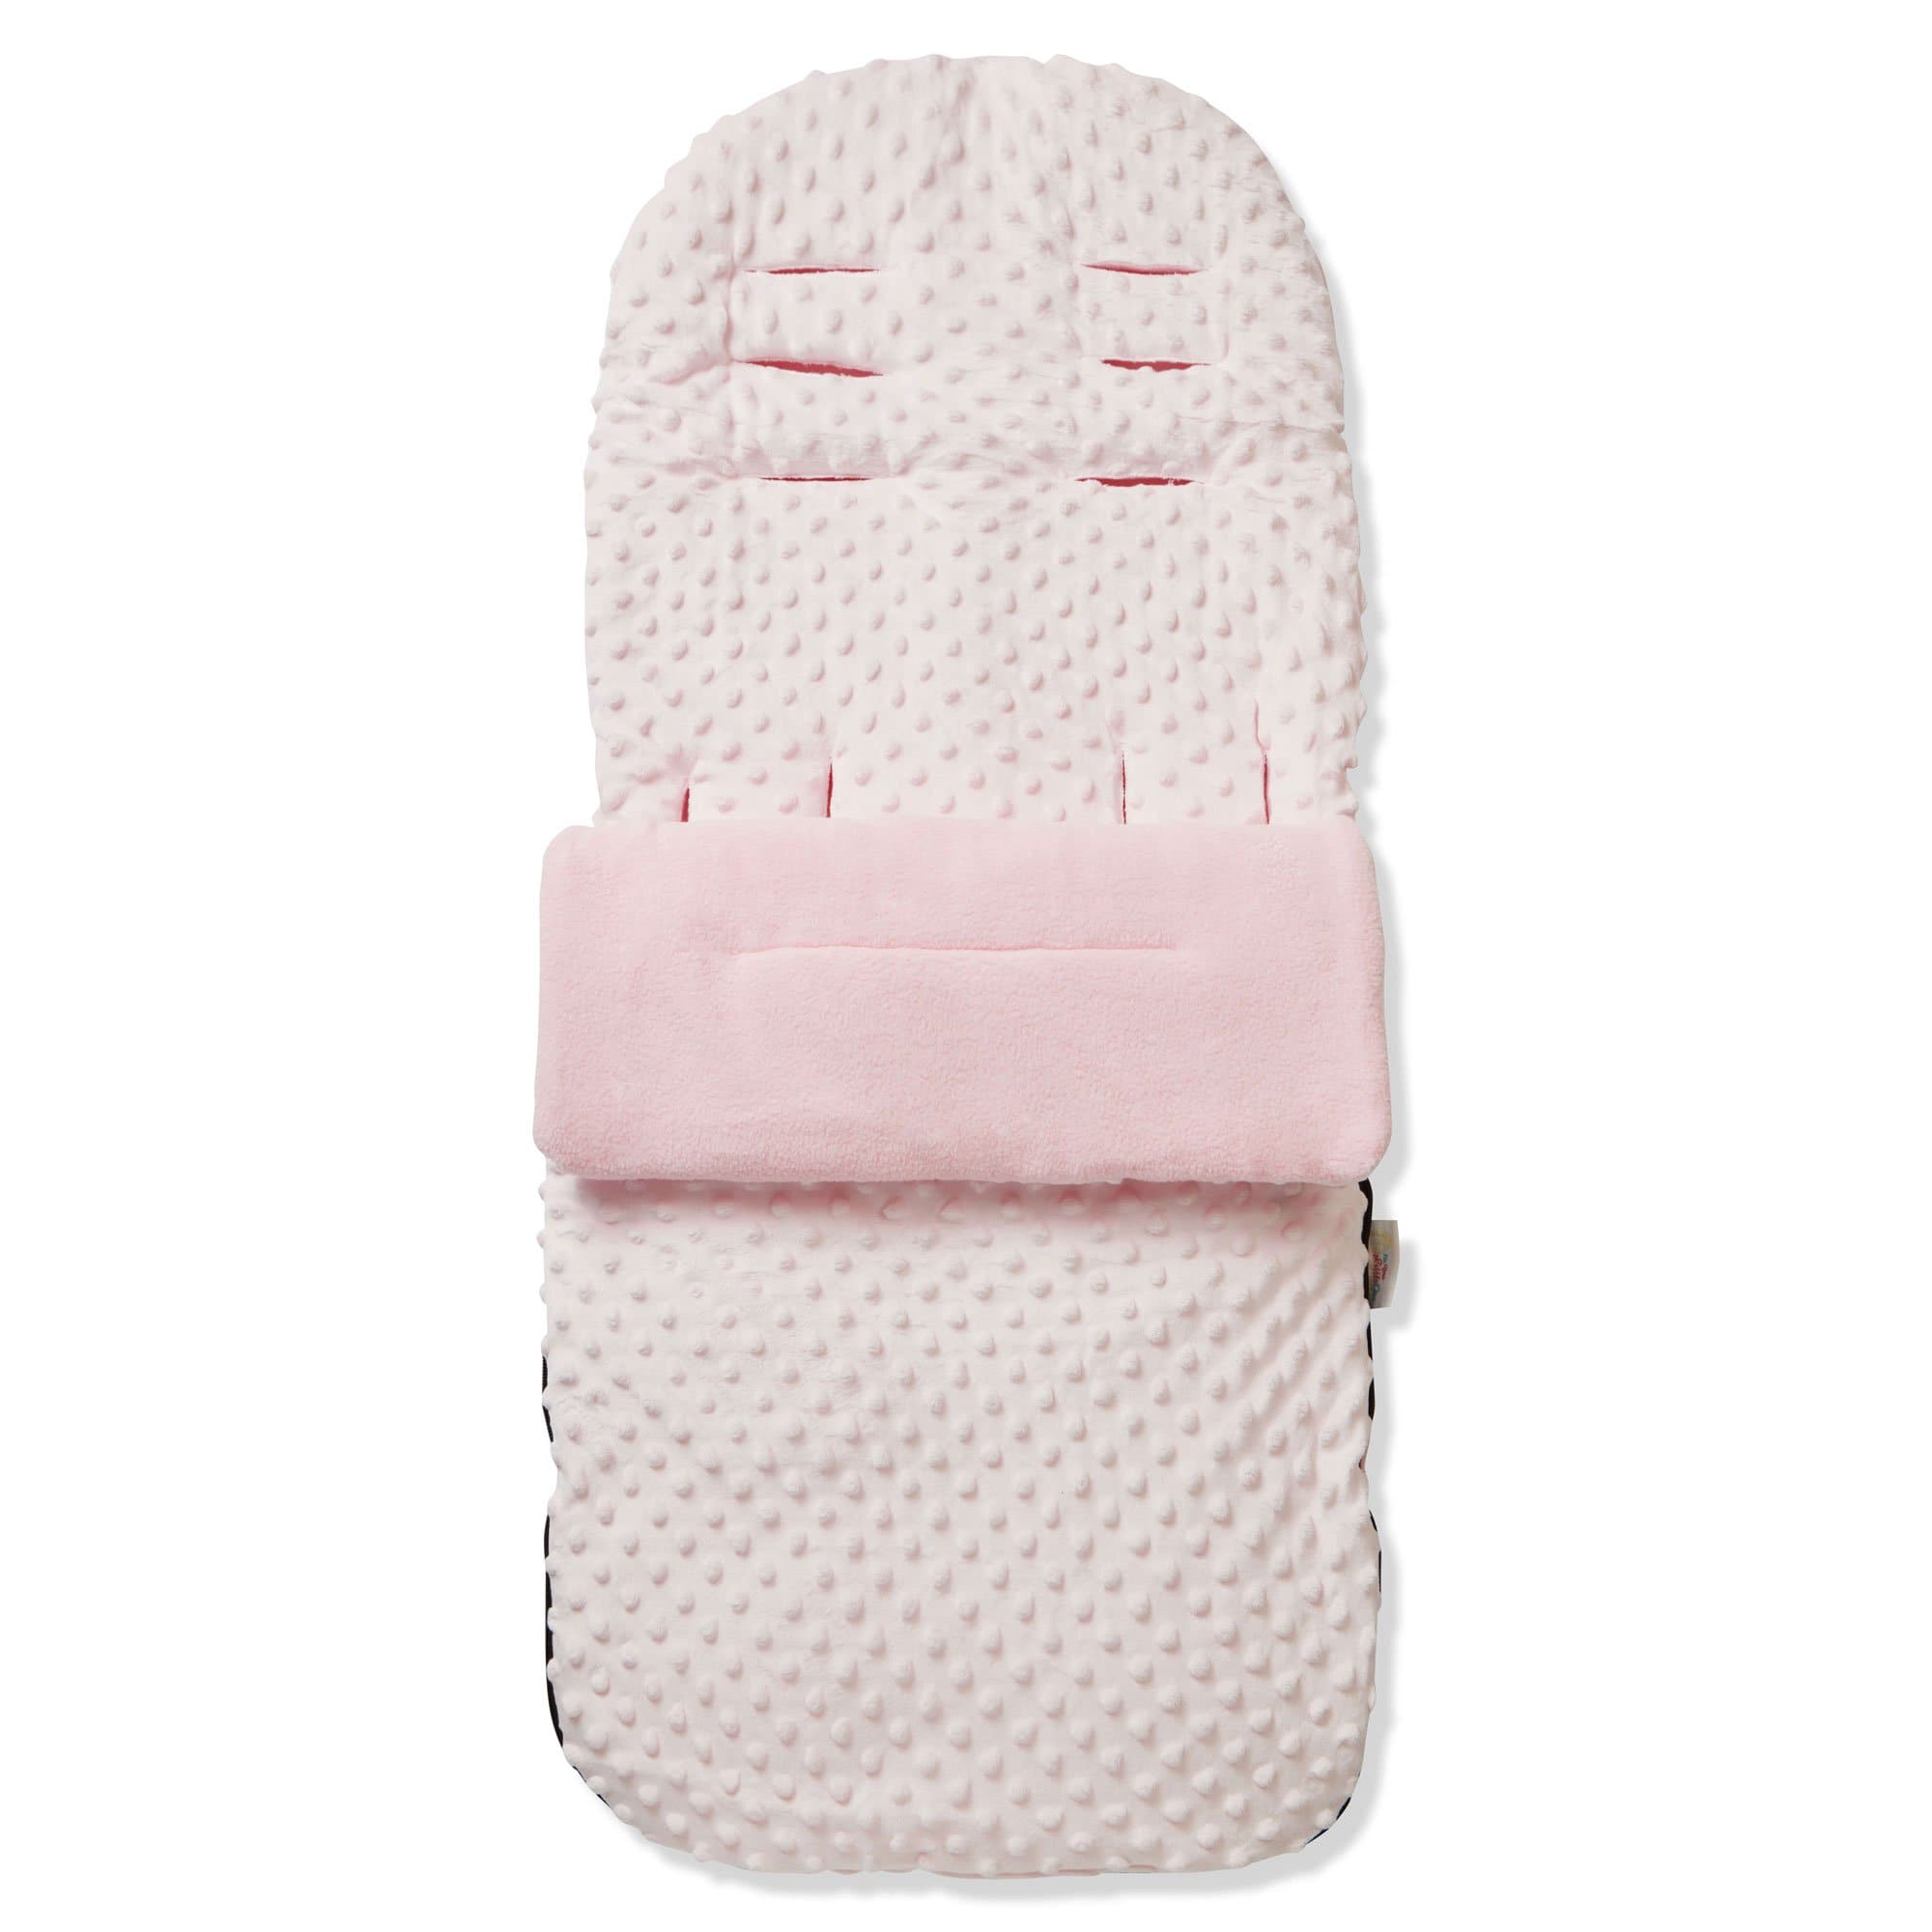 Dimple Footmuff / Cosy Toes Compatible with Inglesina - Pink / Fits All Models | For Your Little One